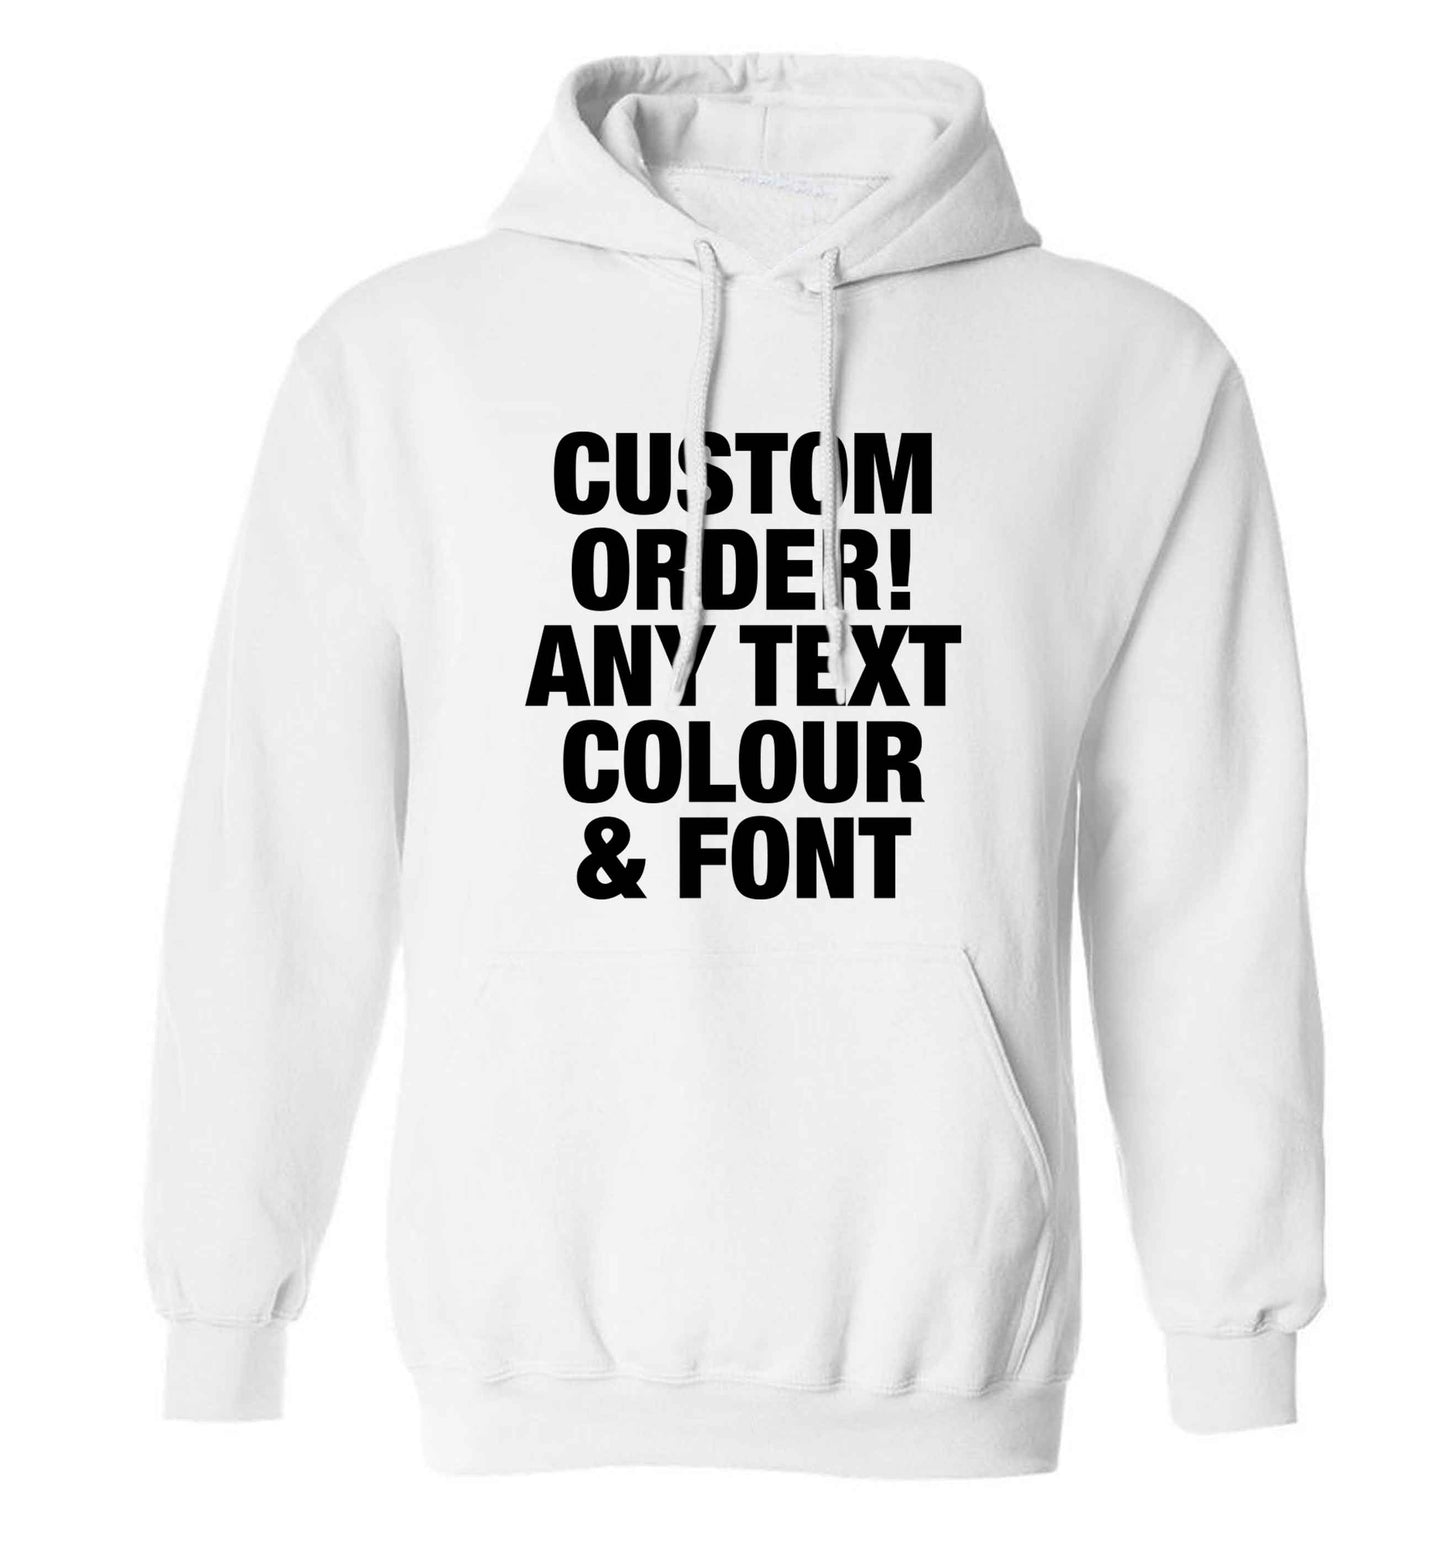 Custom order any text colour and font adults unisex white hoodie 2XL